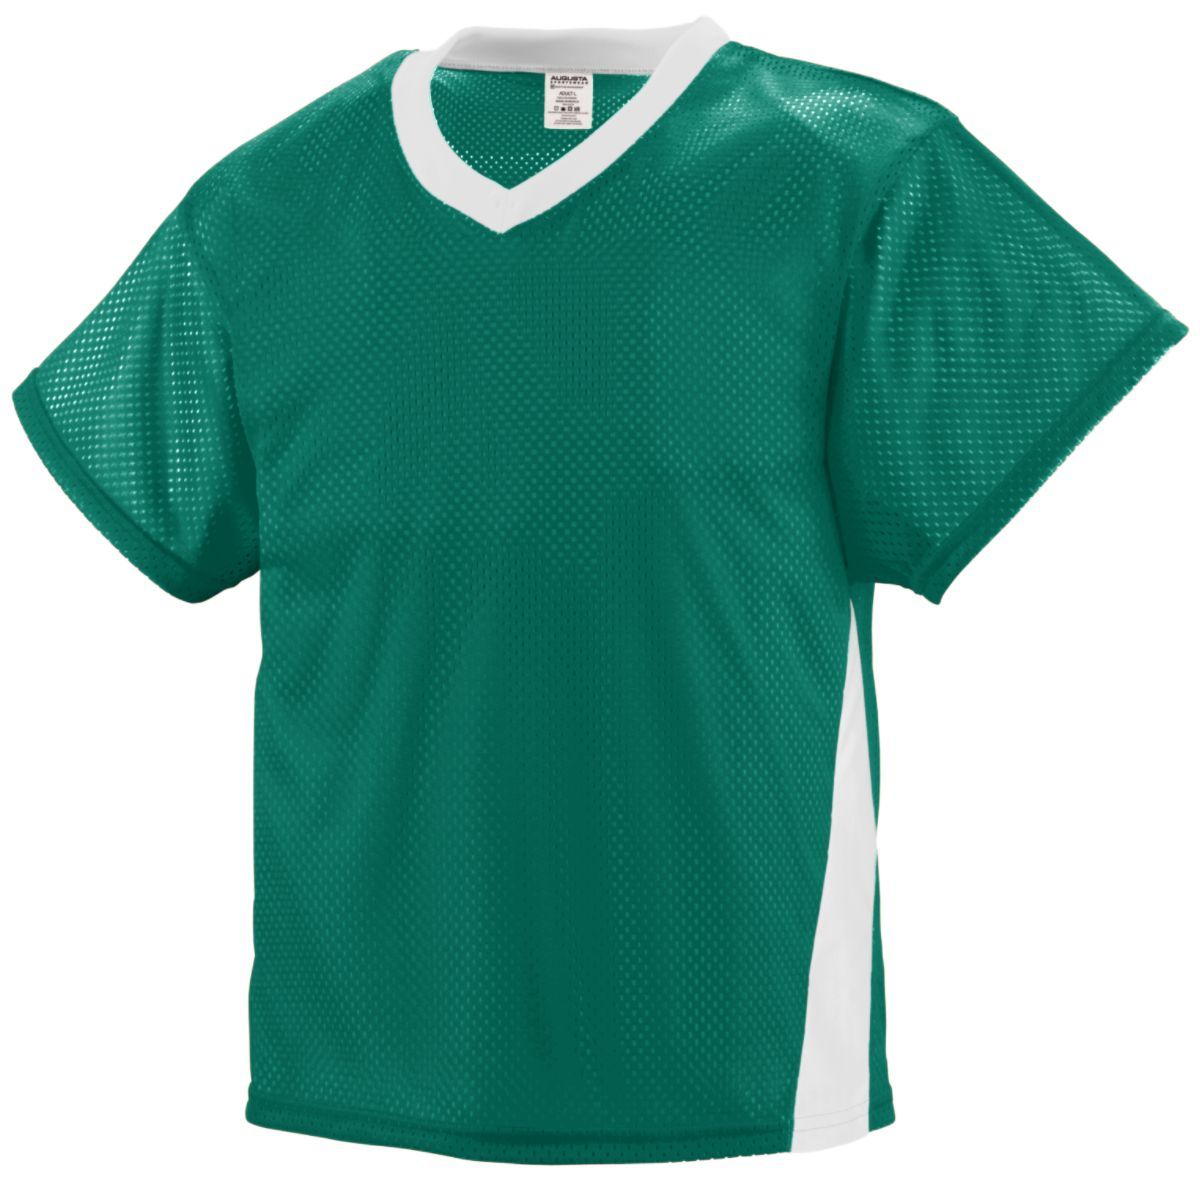 Augusta Sportswear High Score Jersey in Dark Green/White  -Part of the Adult, Adult-Jersey, Augusta-Products, Lacrosse, Shirts, All-Sports, All-Sports-1 product lines at KanaleyCreations.com